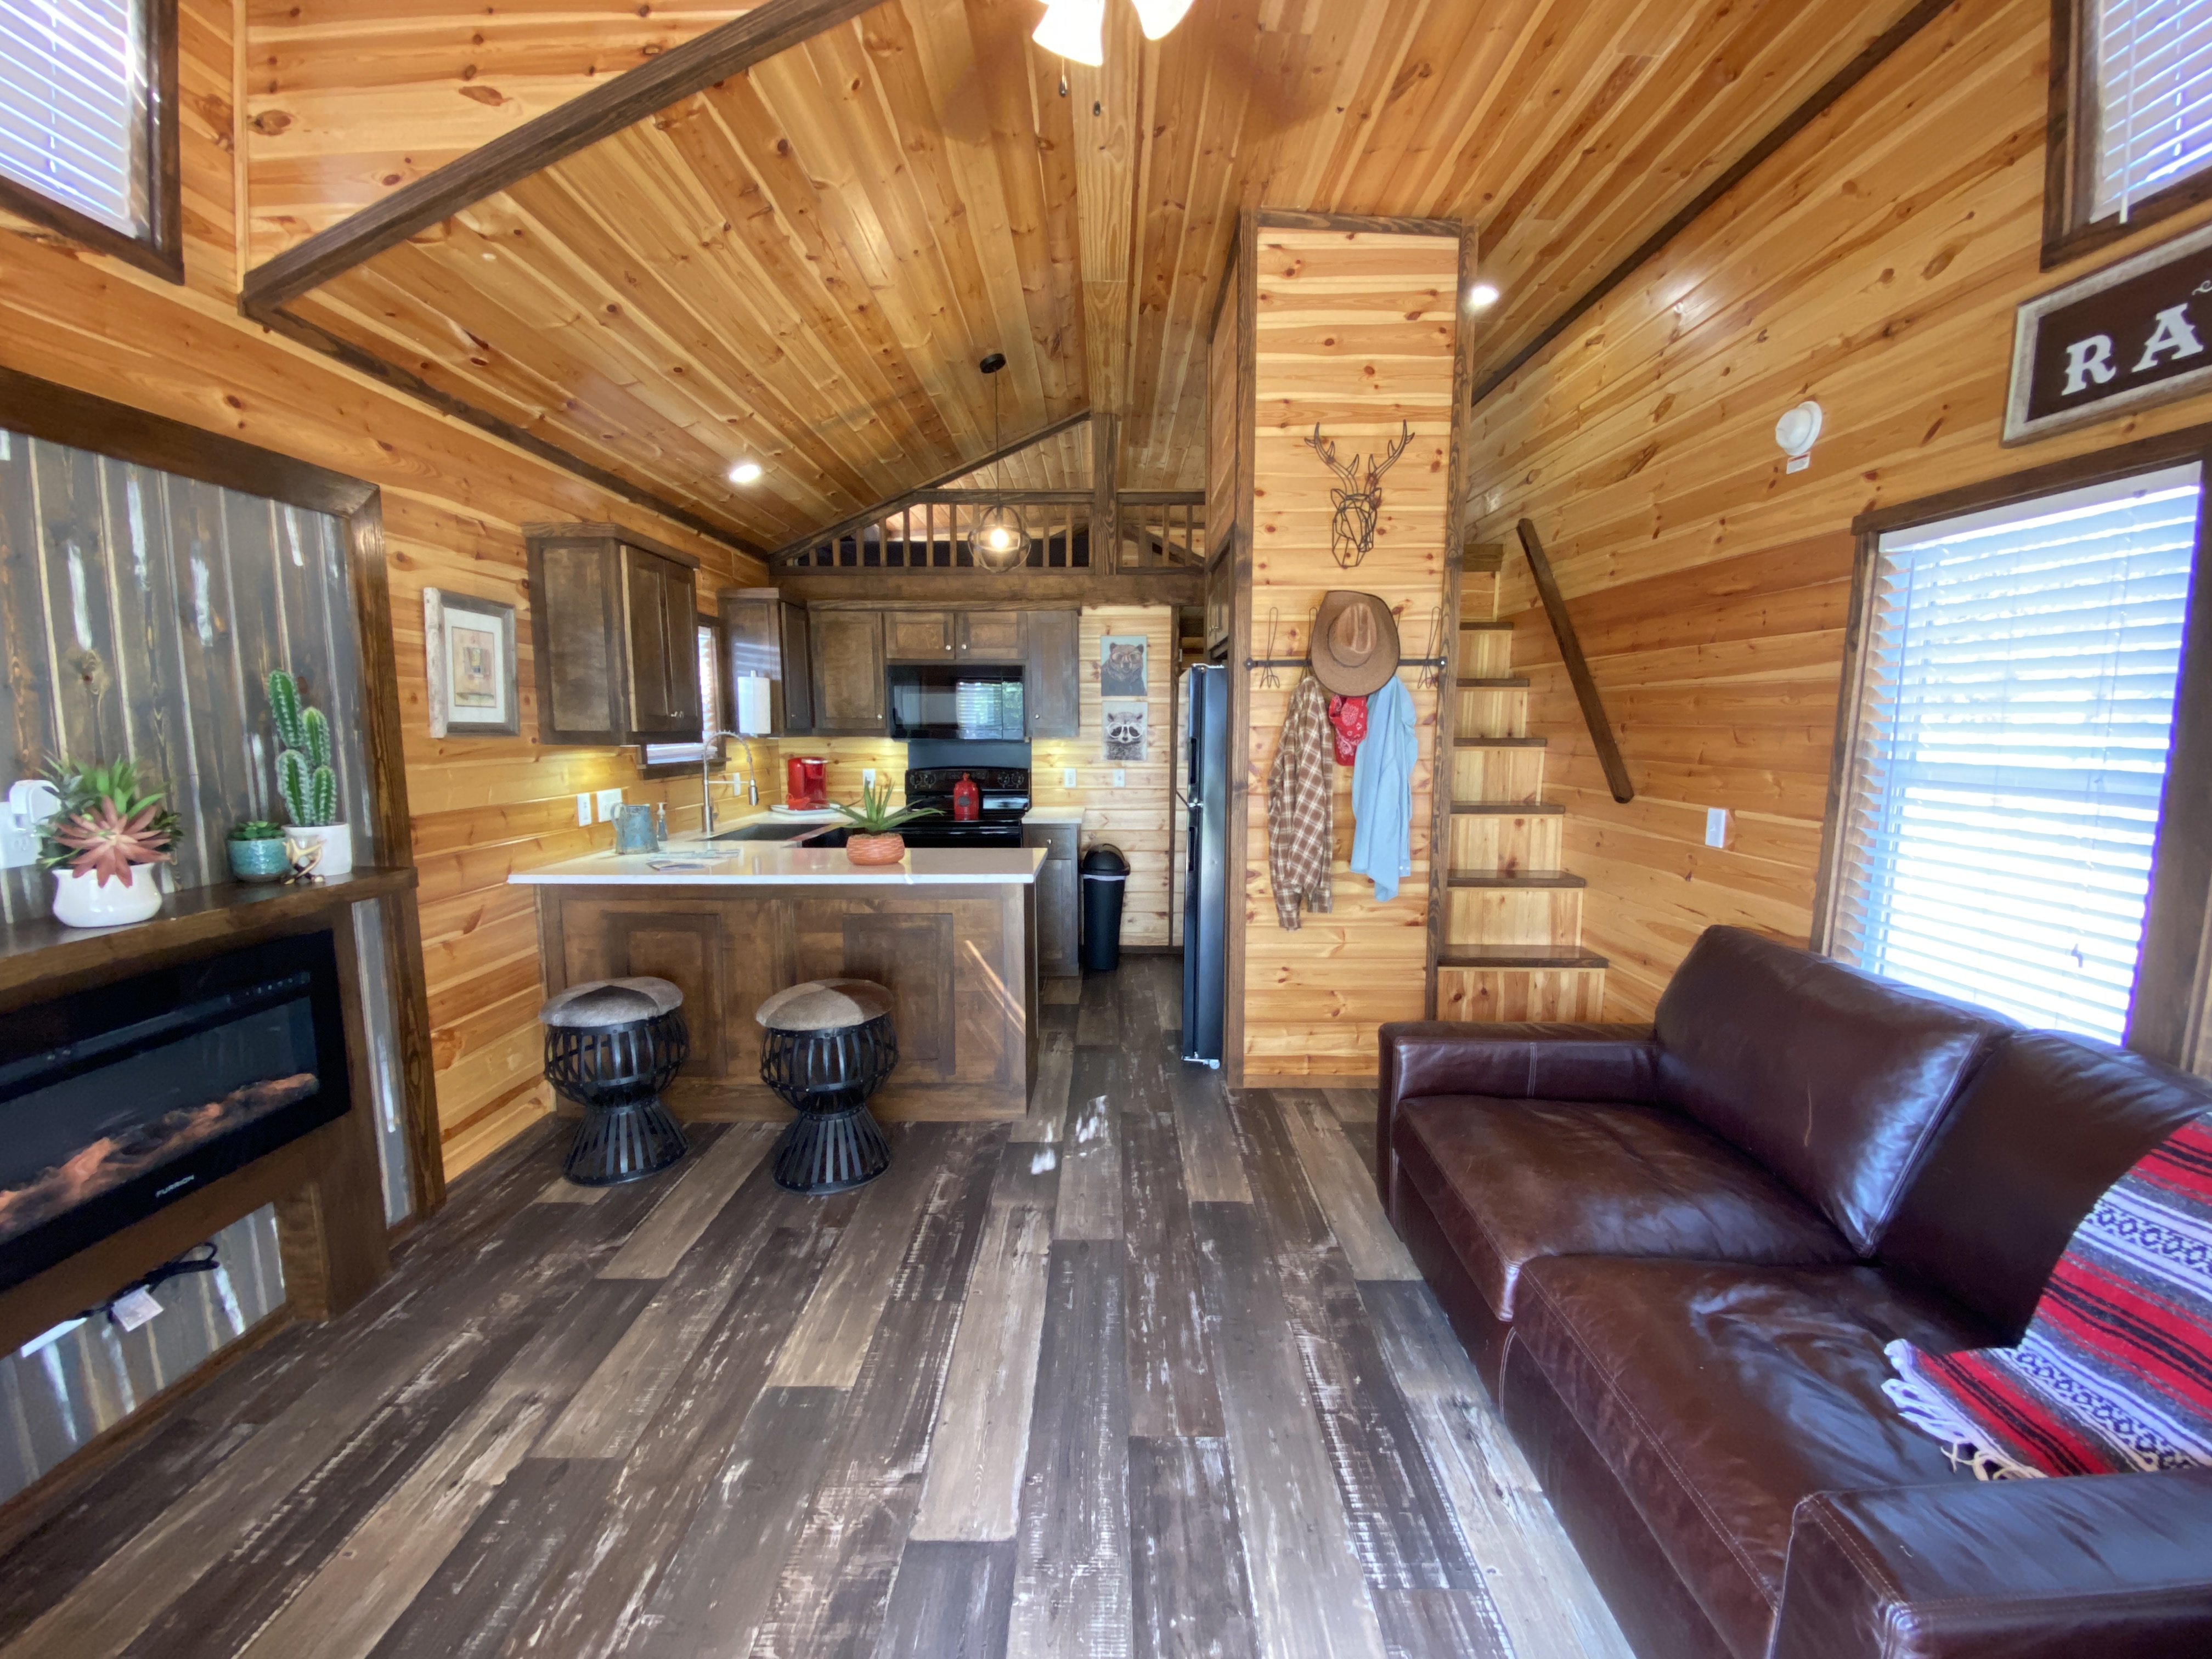 This tiny home exudes a charming Western ambiance with its rustic decor and cowboy-inspired details.